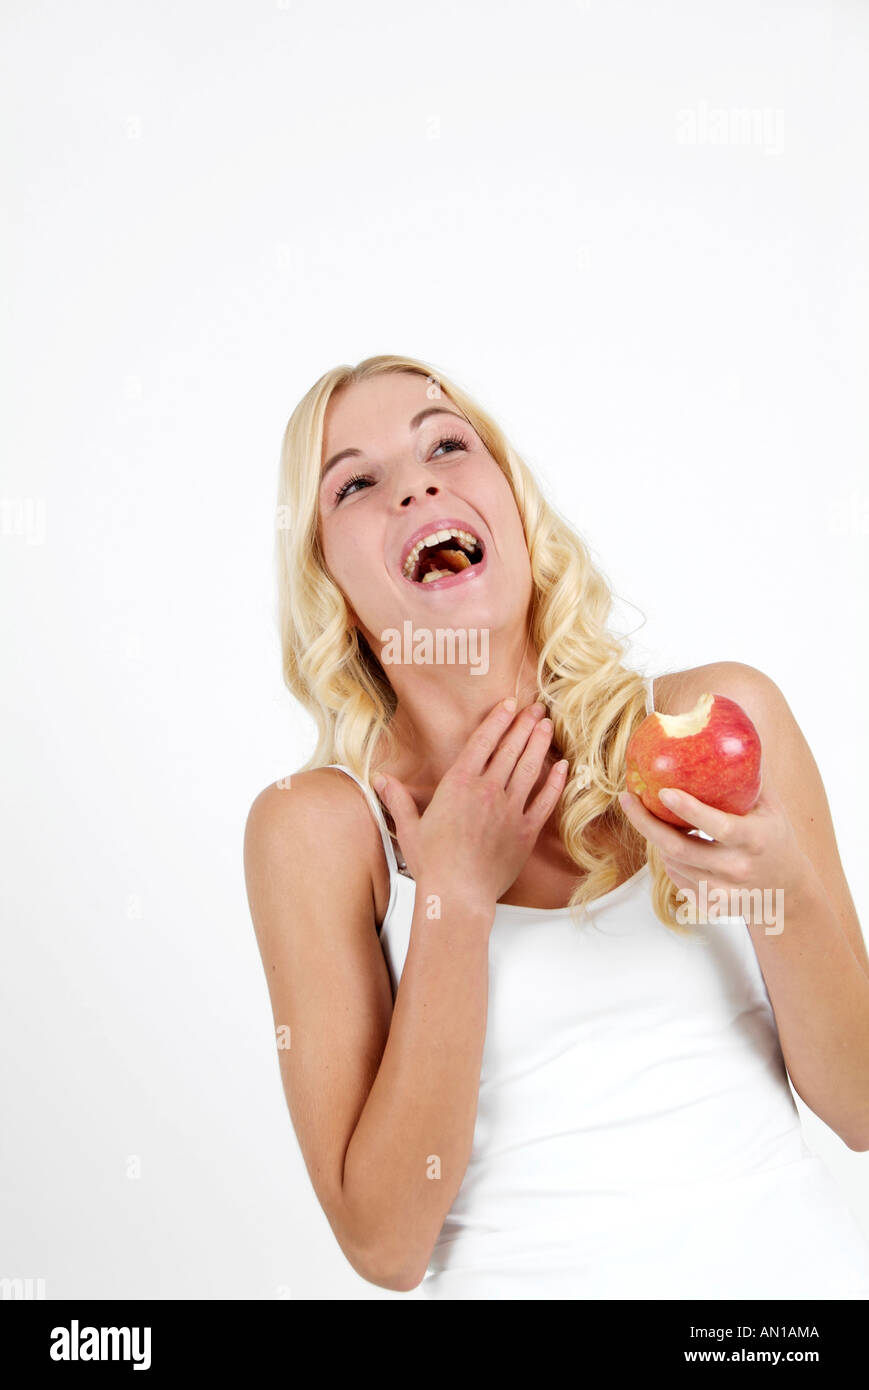 young woman enjoying a red delicious apple Stock Photo